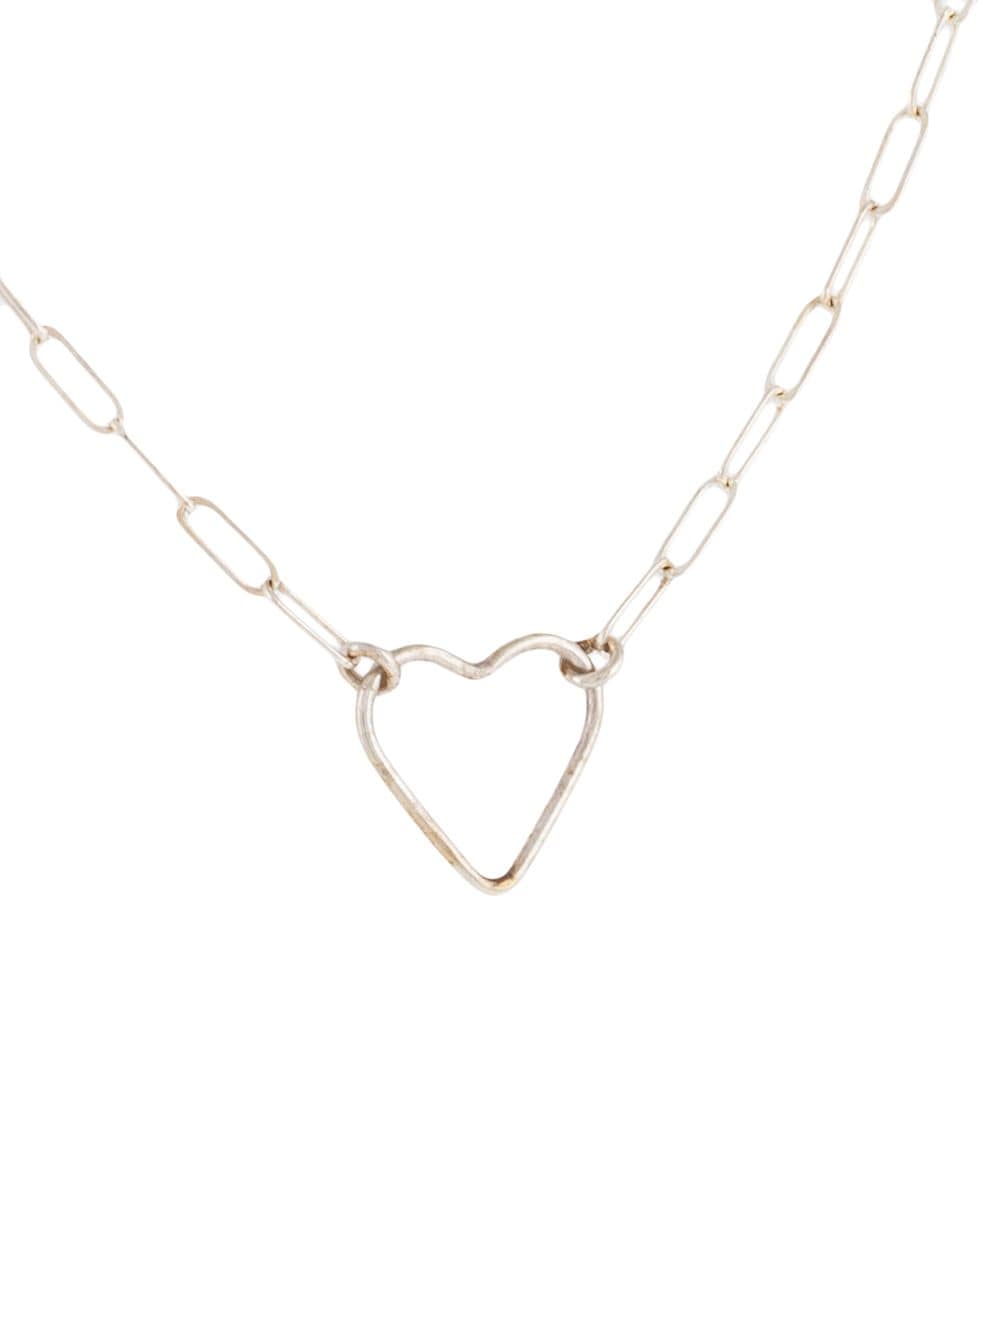 Shop Petite Grand Heart fine chain necklace with Express Delivery ...